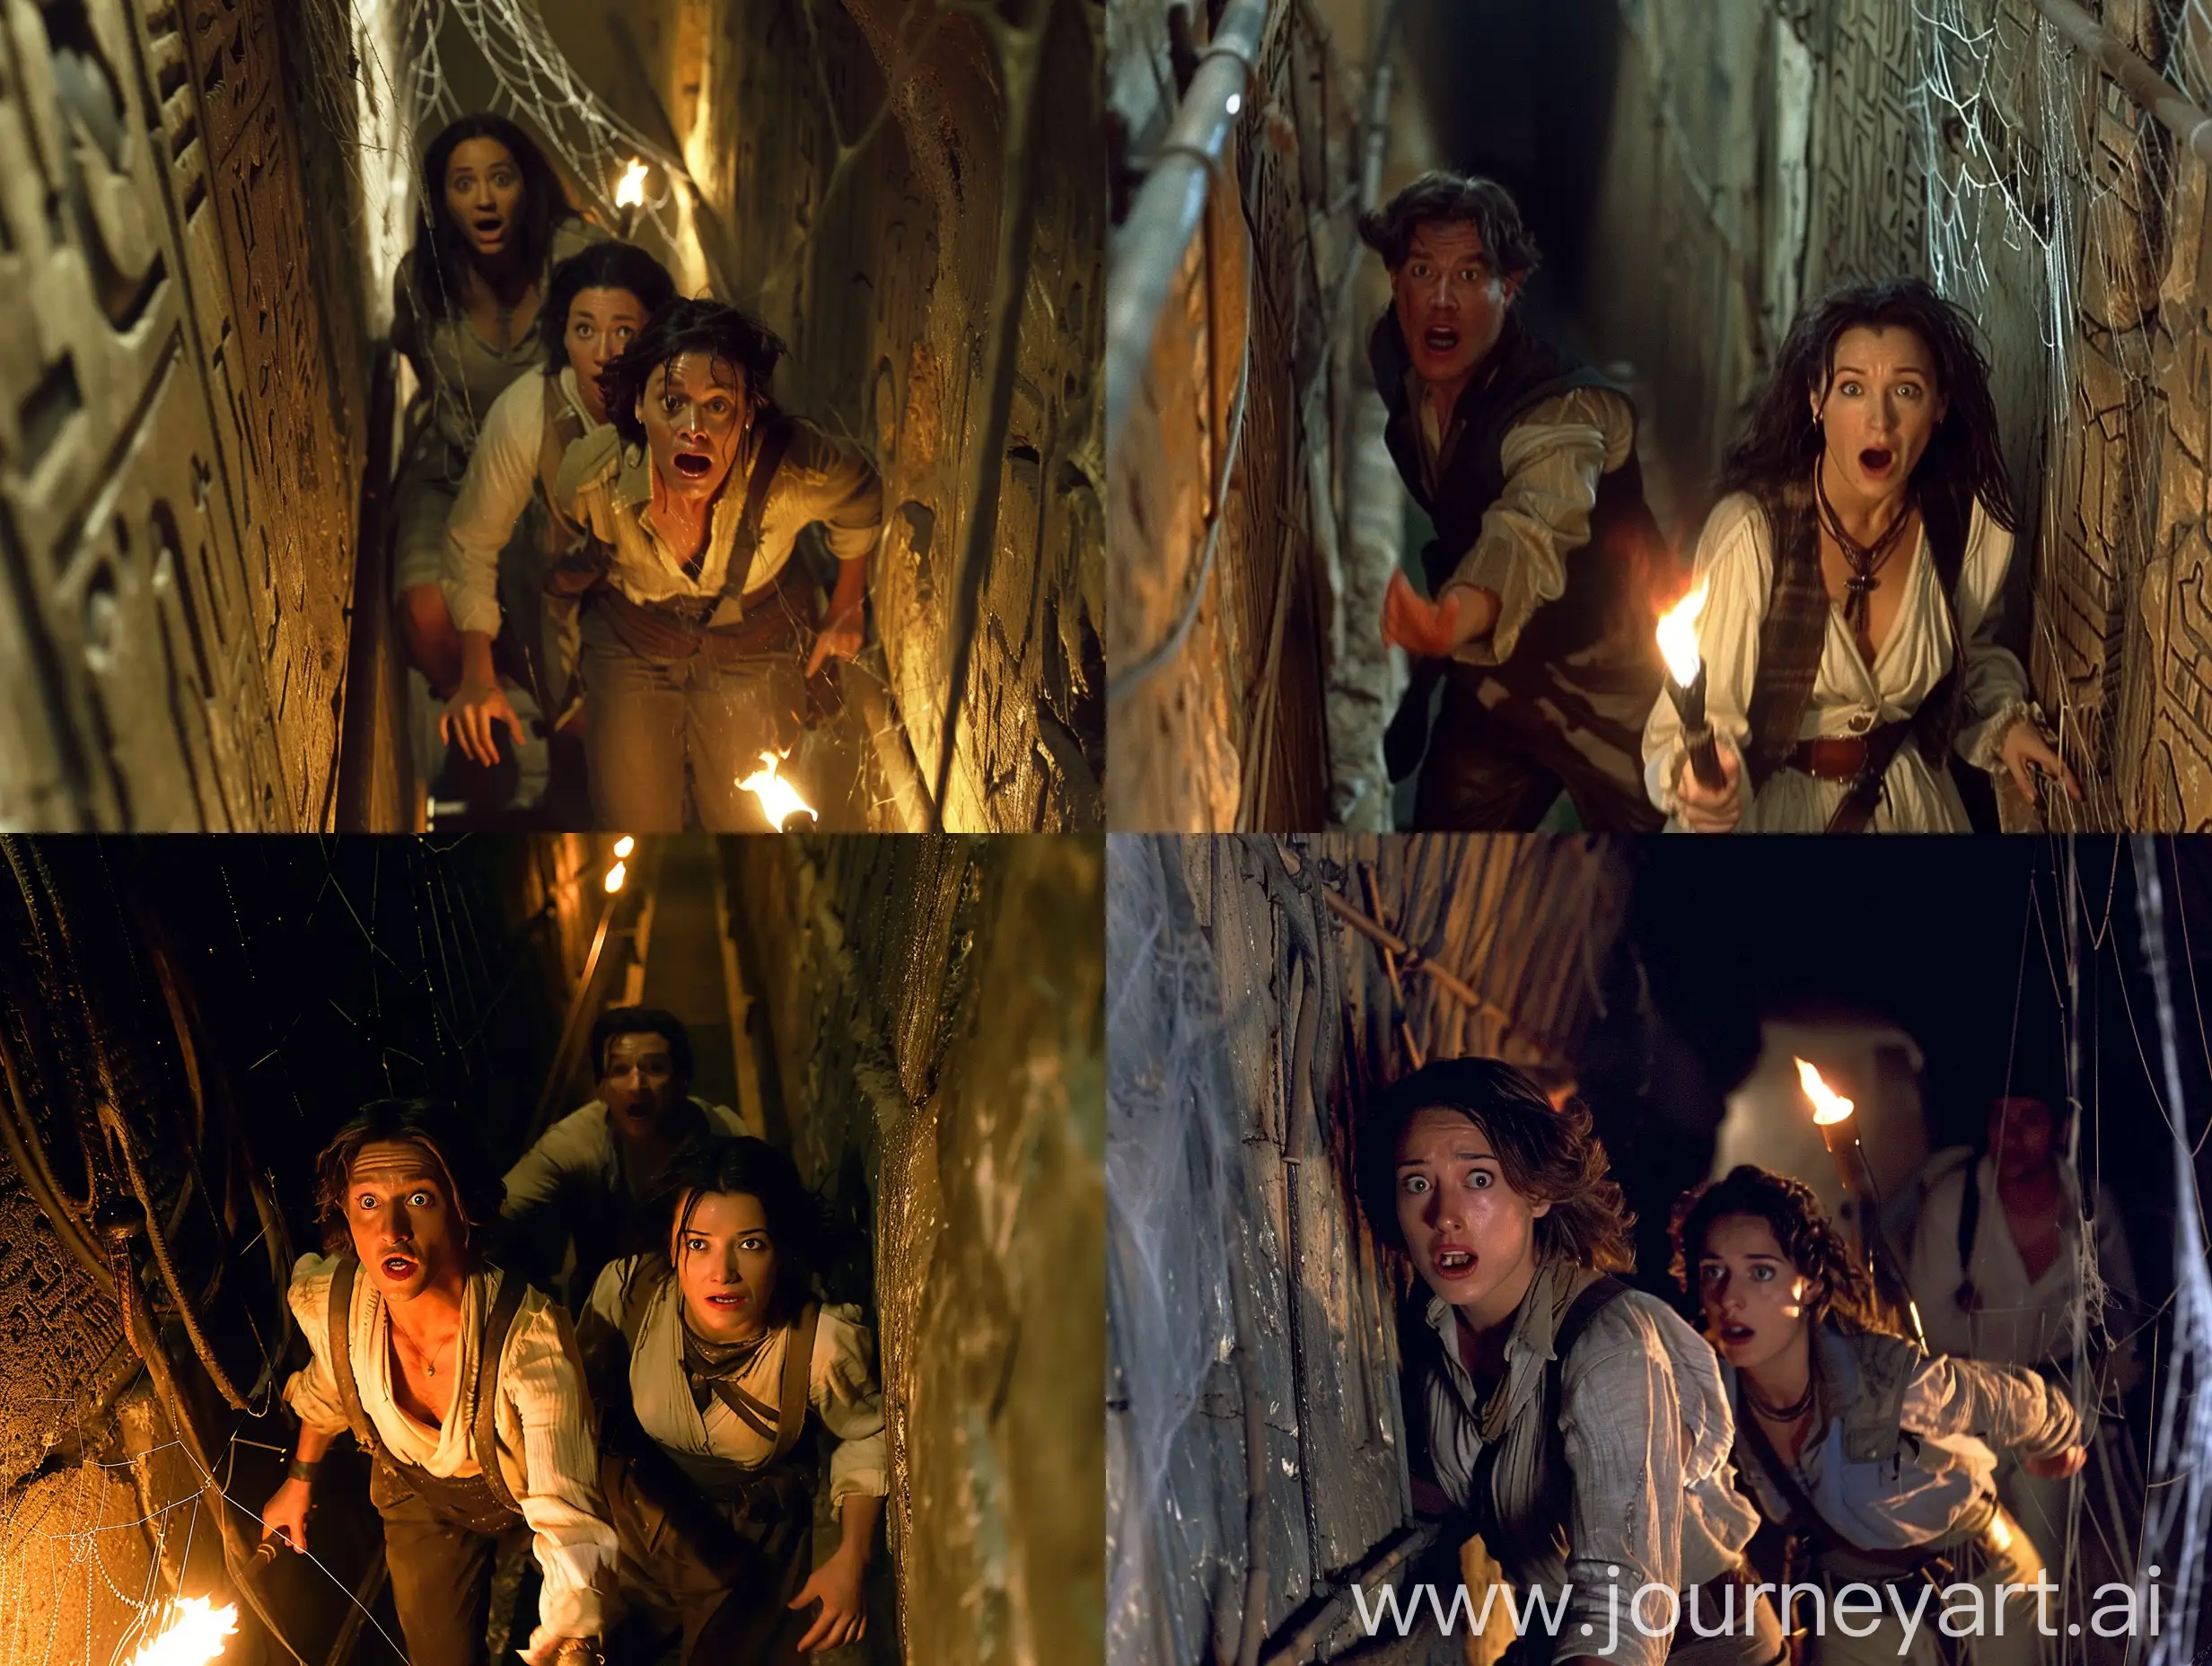 Ancient-Egyptian-Pyramid-Adventure-Brendan-Fraser-and-Rachel-Weisz-in-Awe